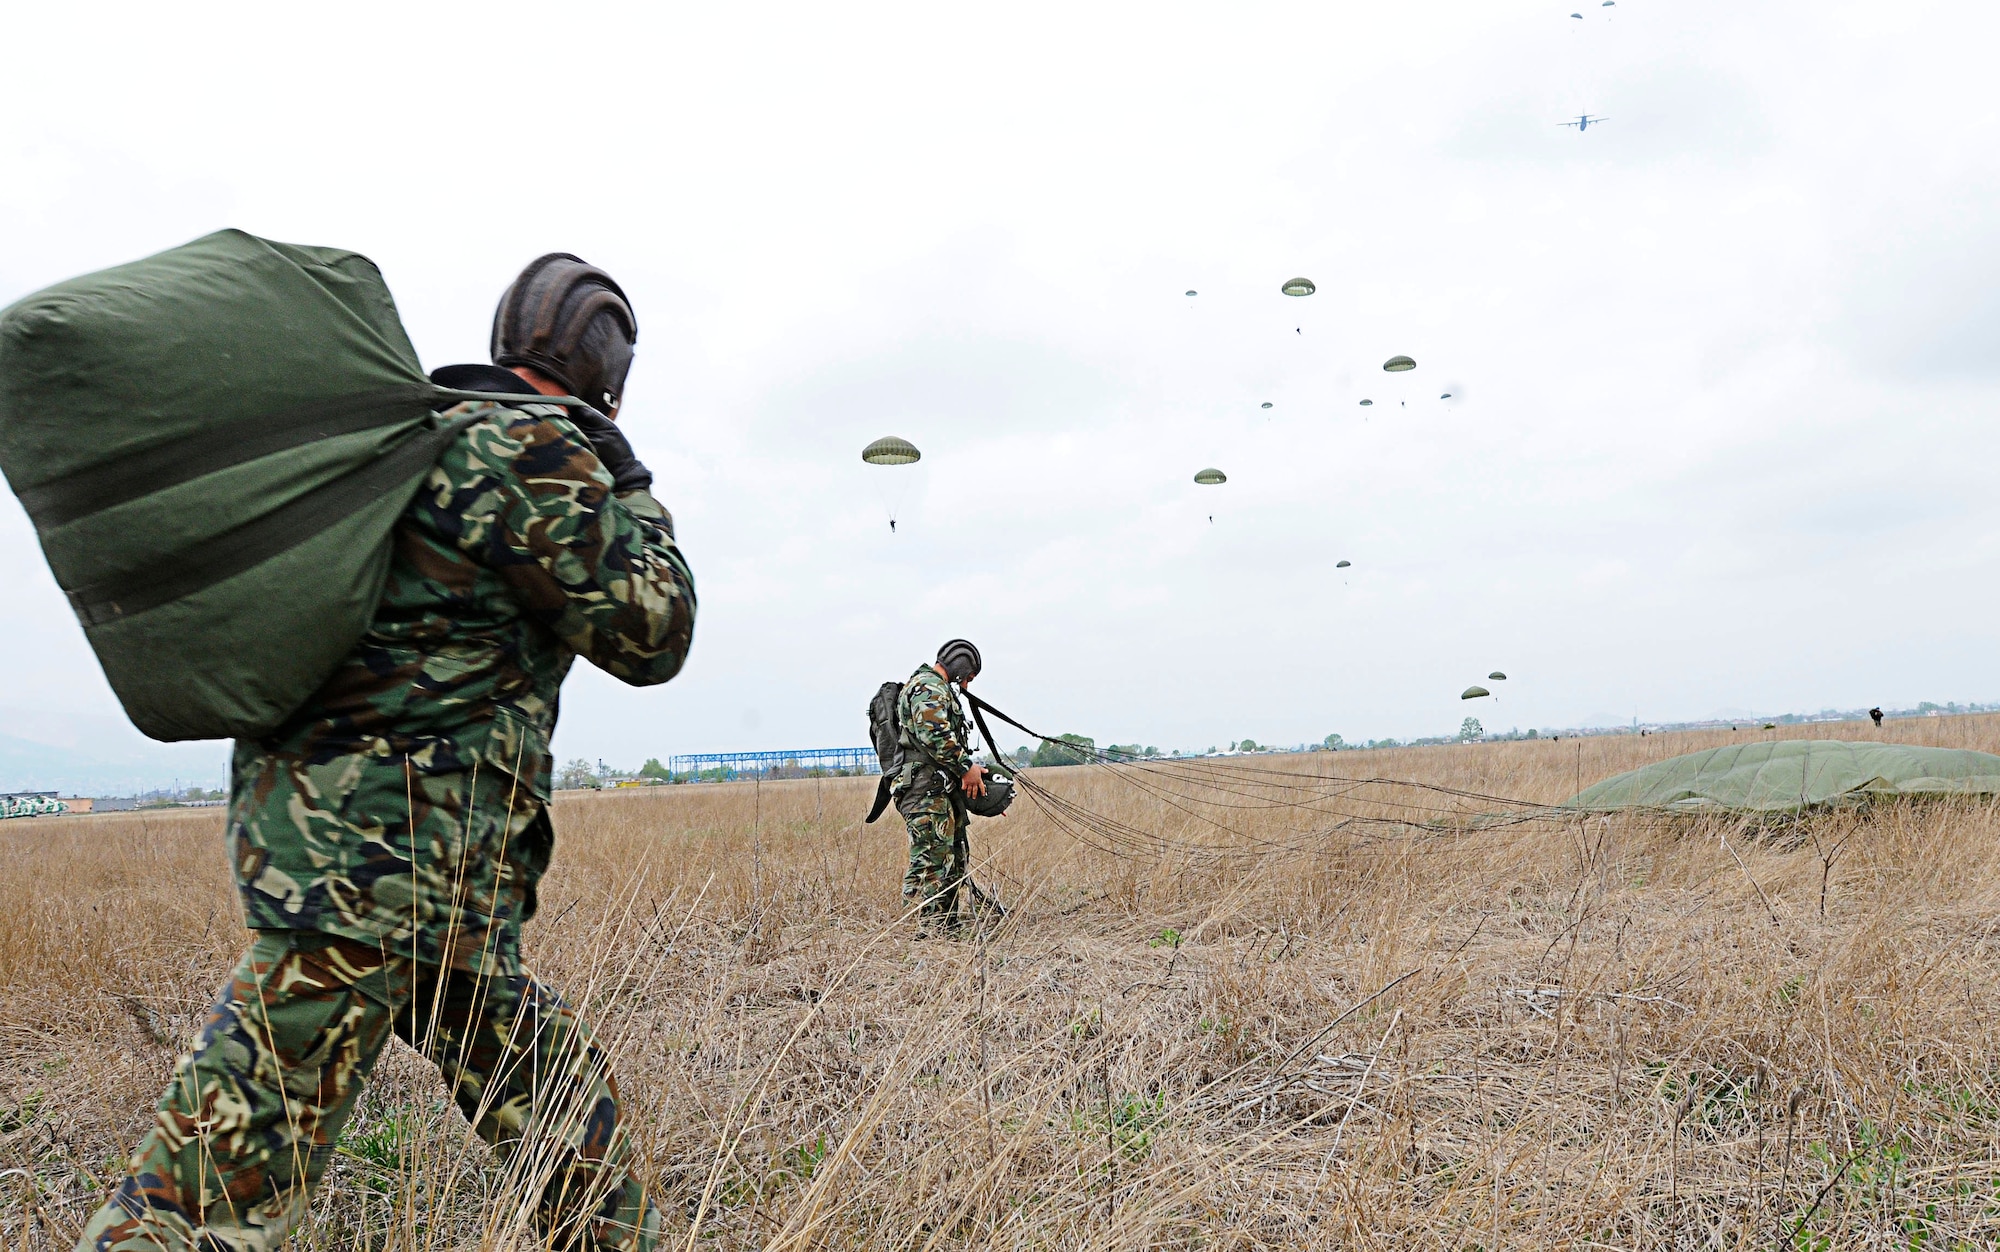 Bulgarian Air Force paratroopers land at the drop zone after a successful static line jump from a U.S. Air Force C-130J Super Hercules in support of Thracian Spring 2011, Plovdiv, Bulgaria, April 28, 2011. Thracian Spring 2011 is a two week on-site training designed to build partnerships between the U.S. and Bulgarian Air Force. (U.S. Air Force photo by Airman 1st Class Desiree W. Esposito)